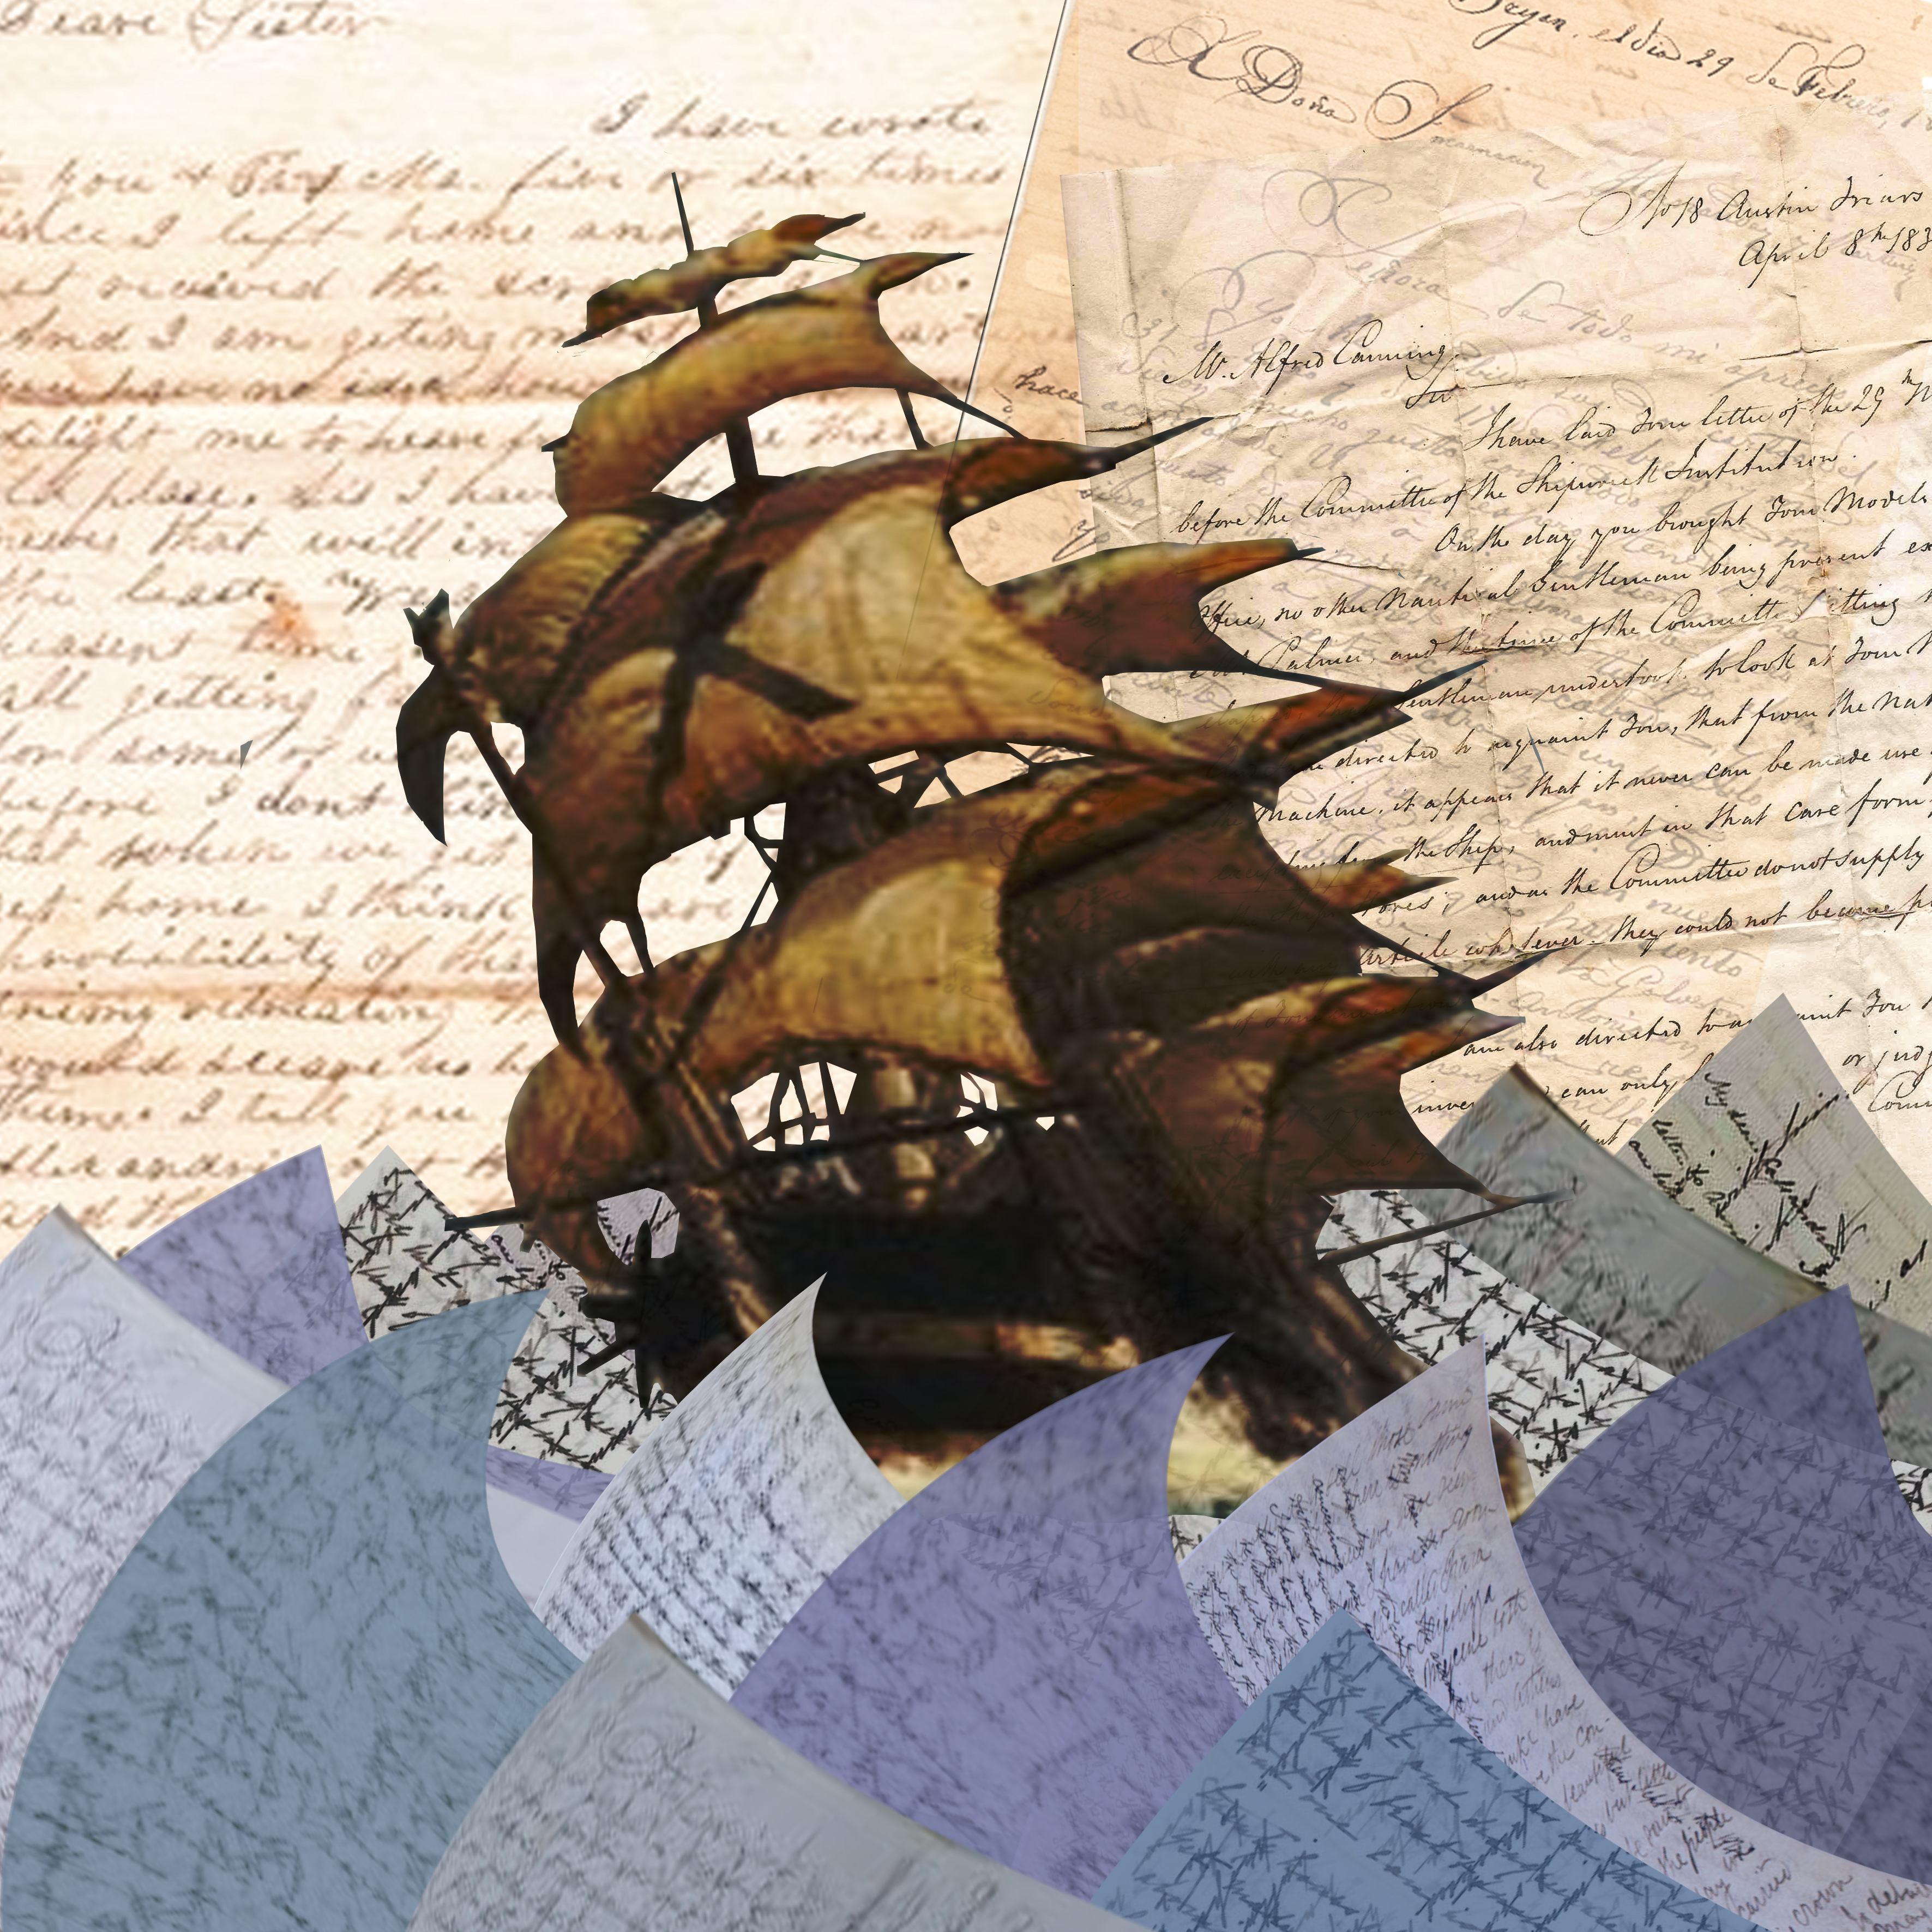 A painting of a large sailing ship in choppy seas made up of paper with text written all over it